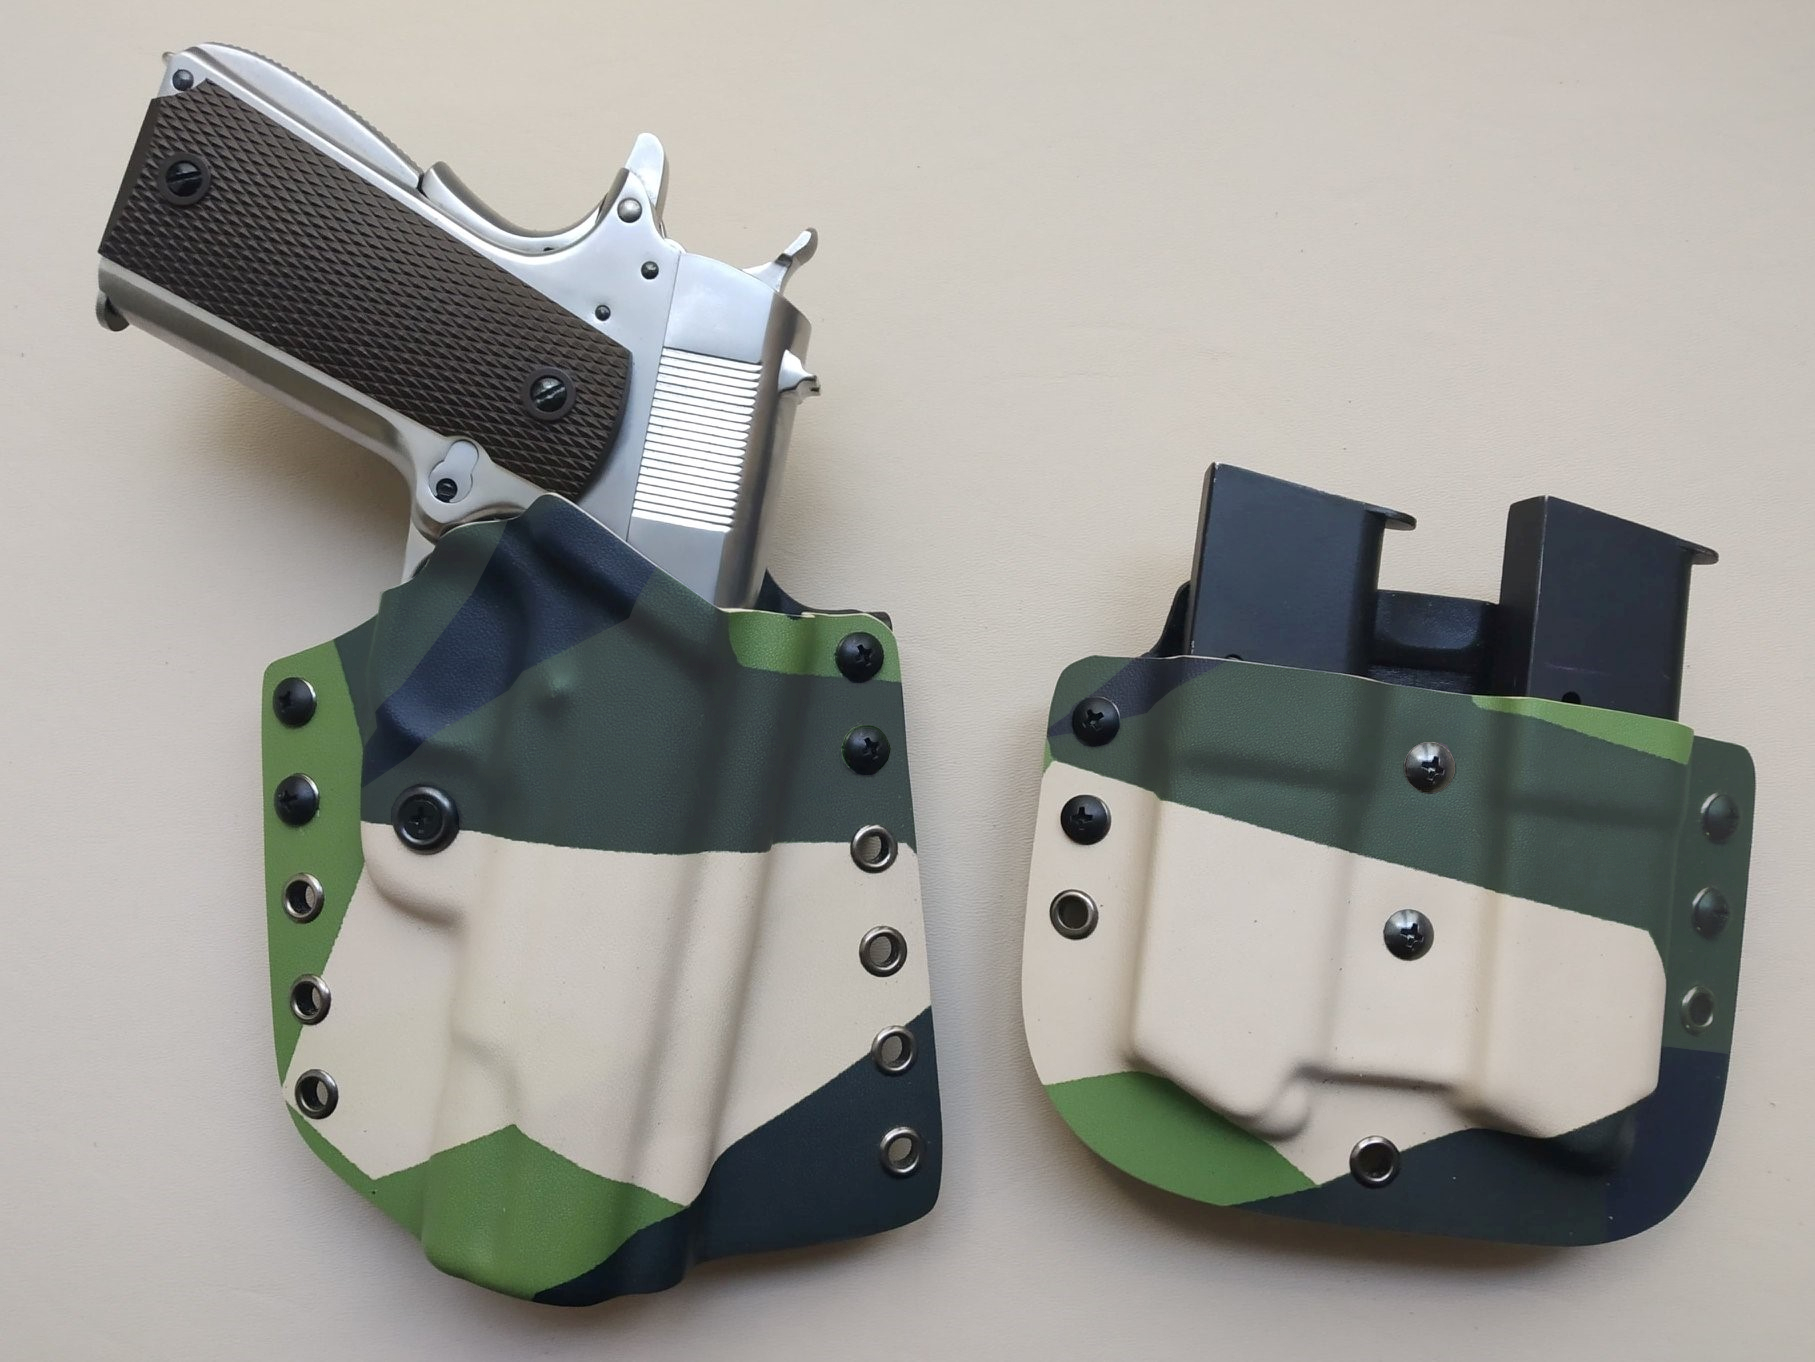 holster engaged etfr france camo suedois 1911 colt 45 acp pancake